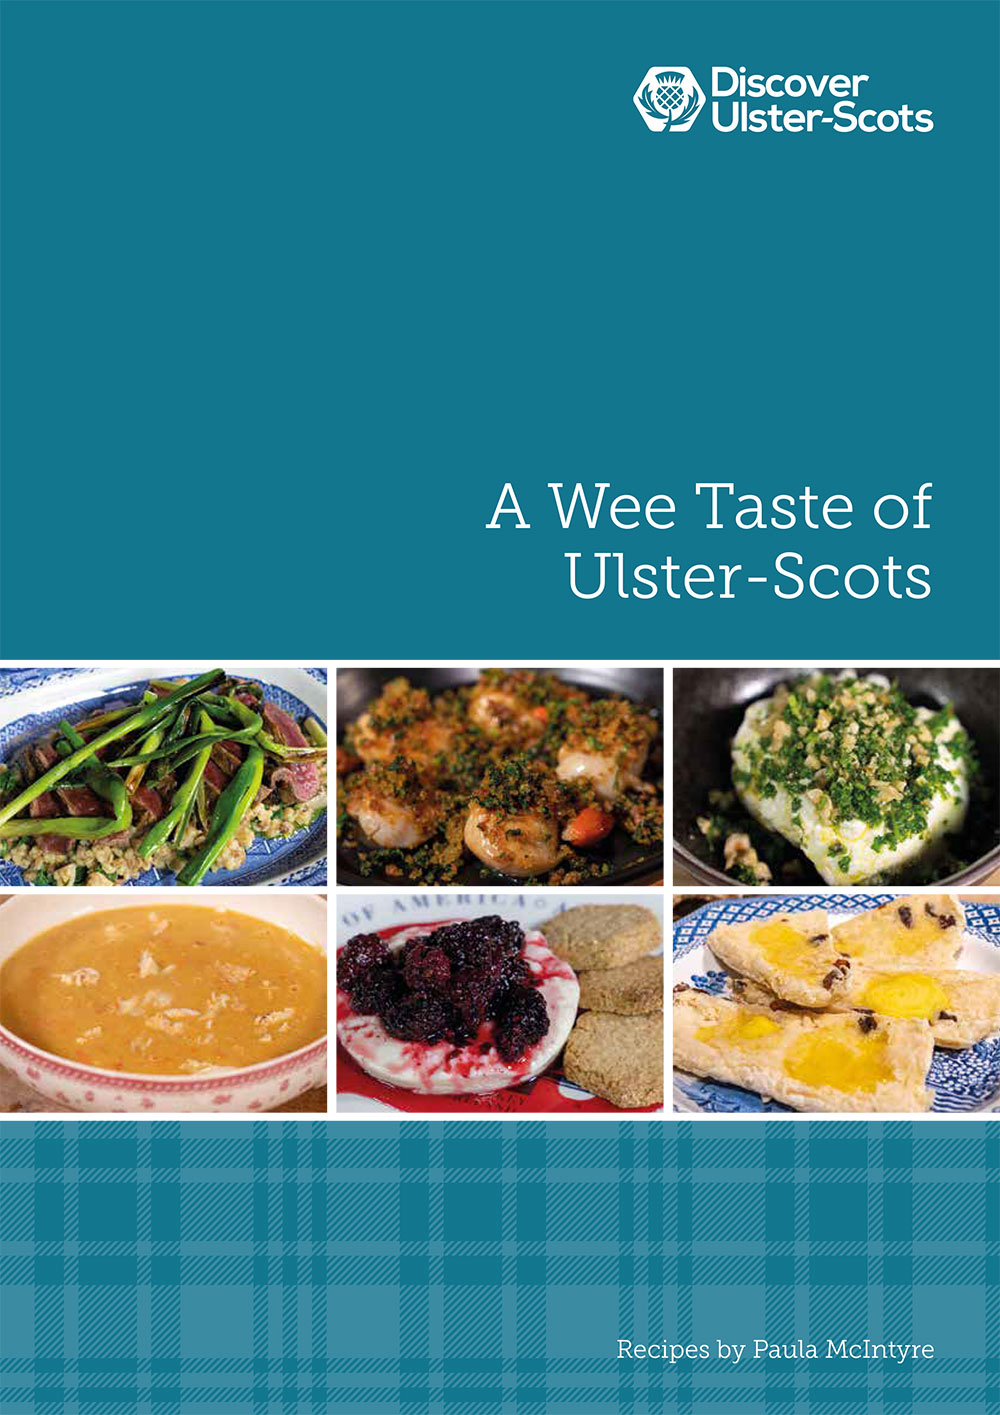 A Wee Taste of Ulster-Scots